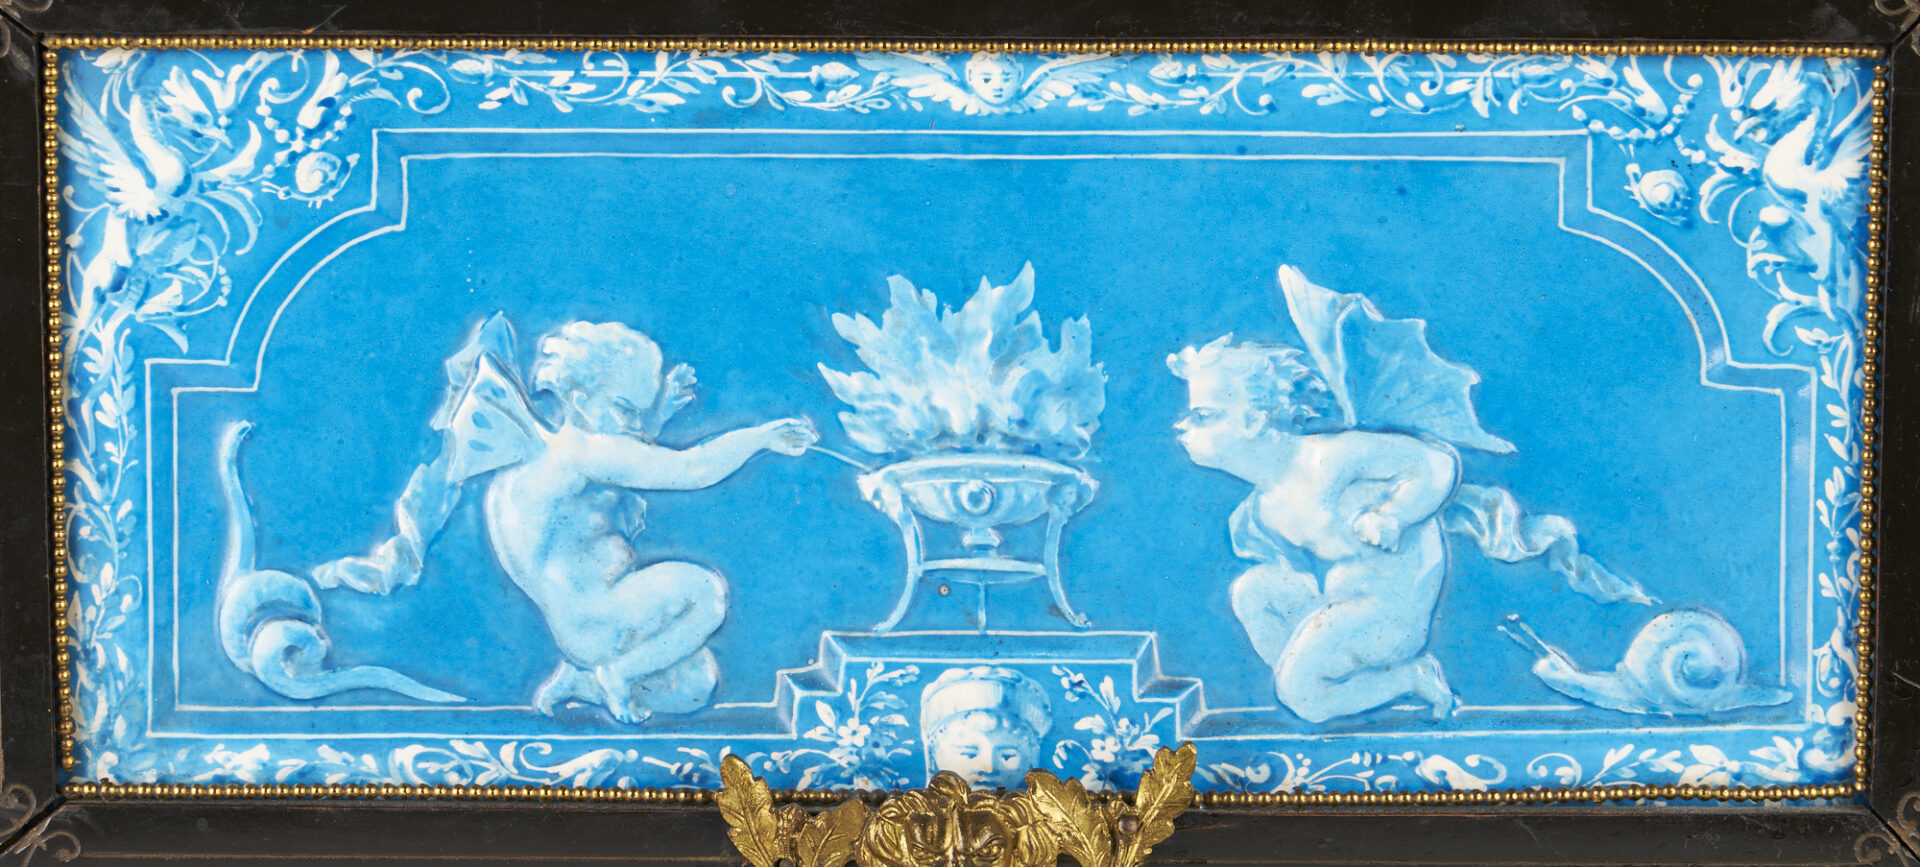 Lot 207: Aesthetic Movement Jardiniere with French Tiles